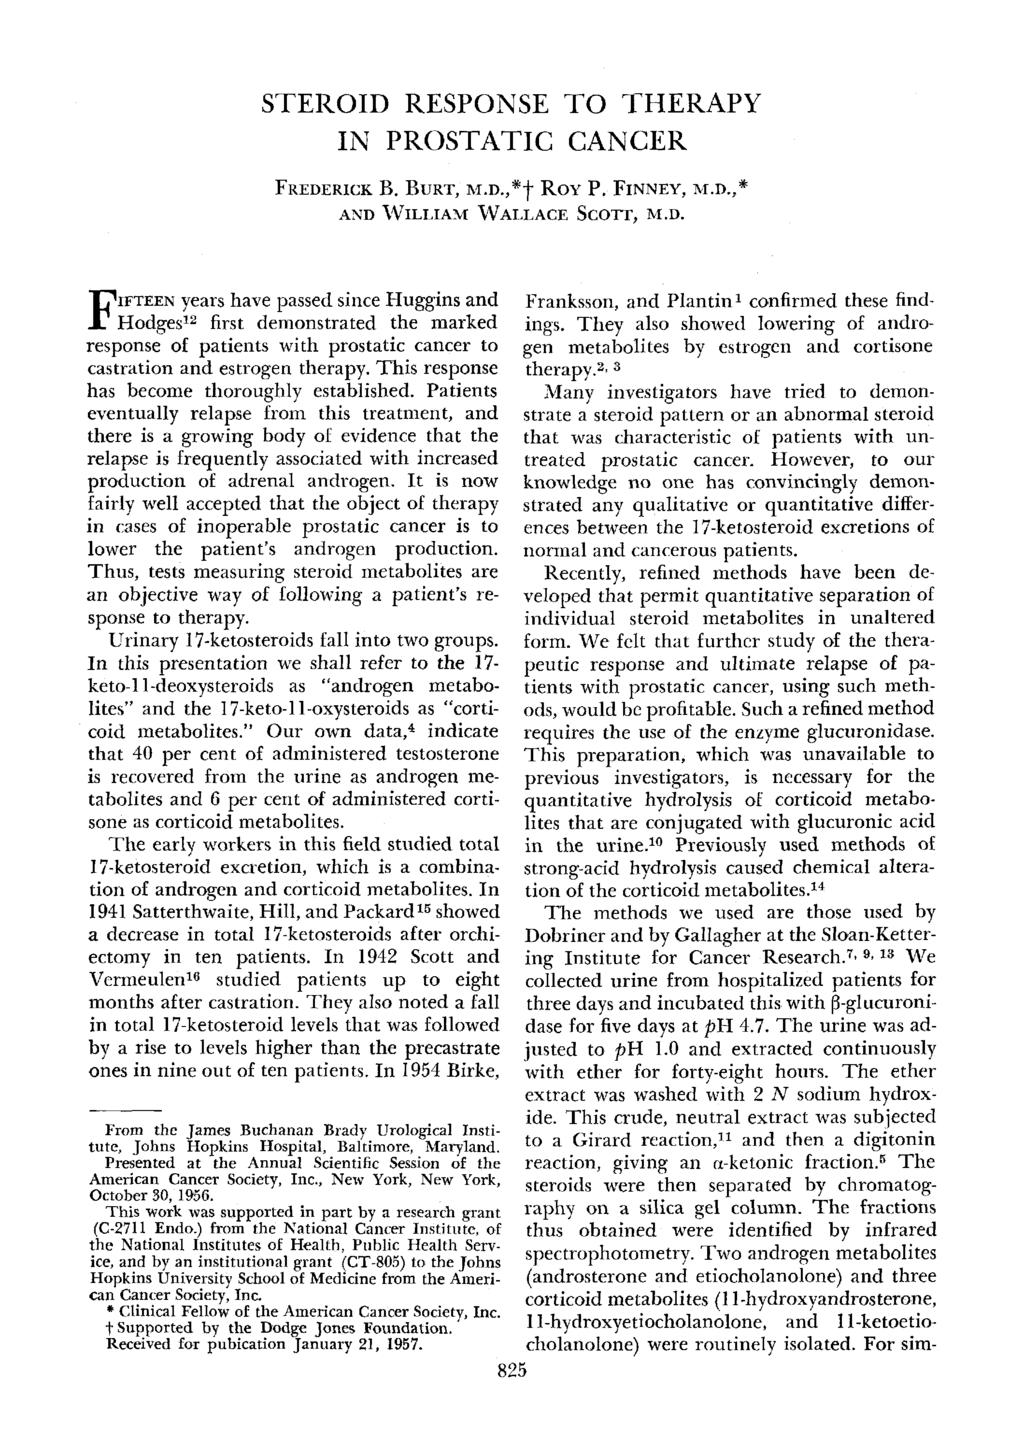 STEROID RESPONSE TO THERAPY IN PROSTATIC CANCER FKEDERICK B. BURT, hl.d.,"t ROY P. FINNEY, AND WILLIAM WALLACE SCOTT, M.D. M.D.," IFTEEN years have passed since Huggins and F Hodgeslz first demonstrated the marked response of patients with prostatic cancer to castration and estrogen therapy.